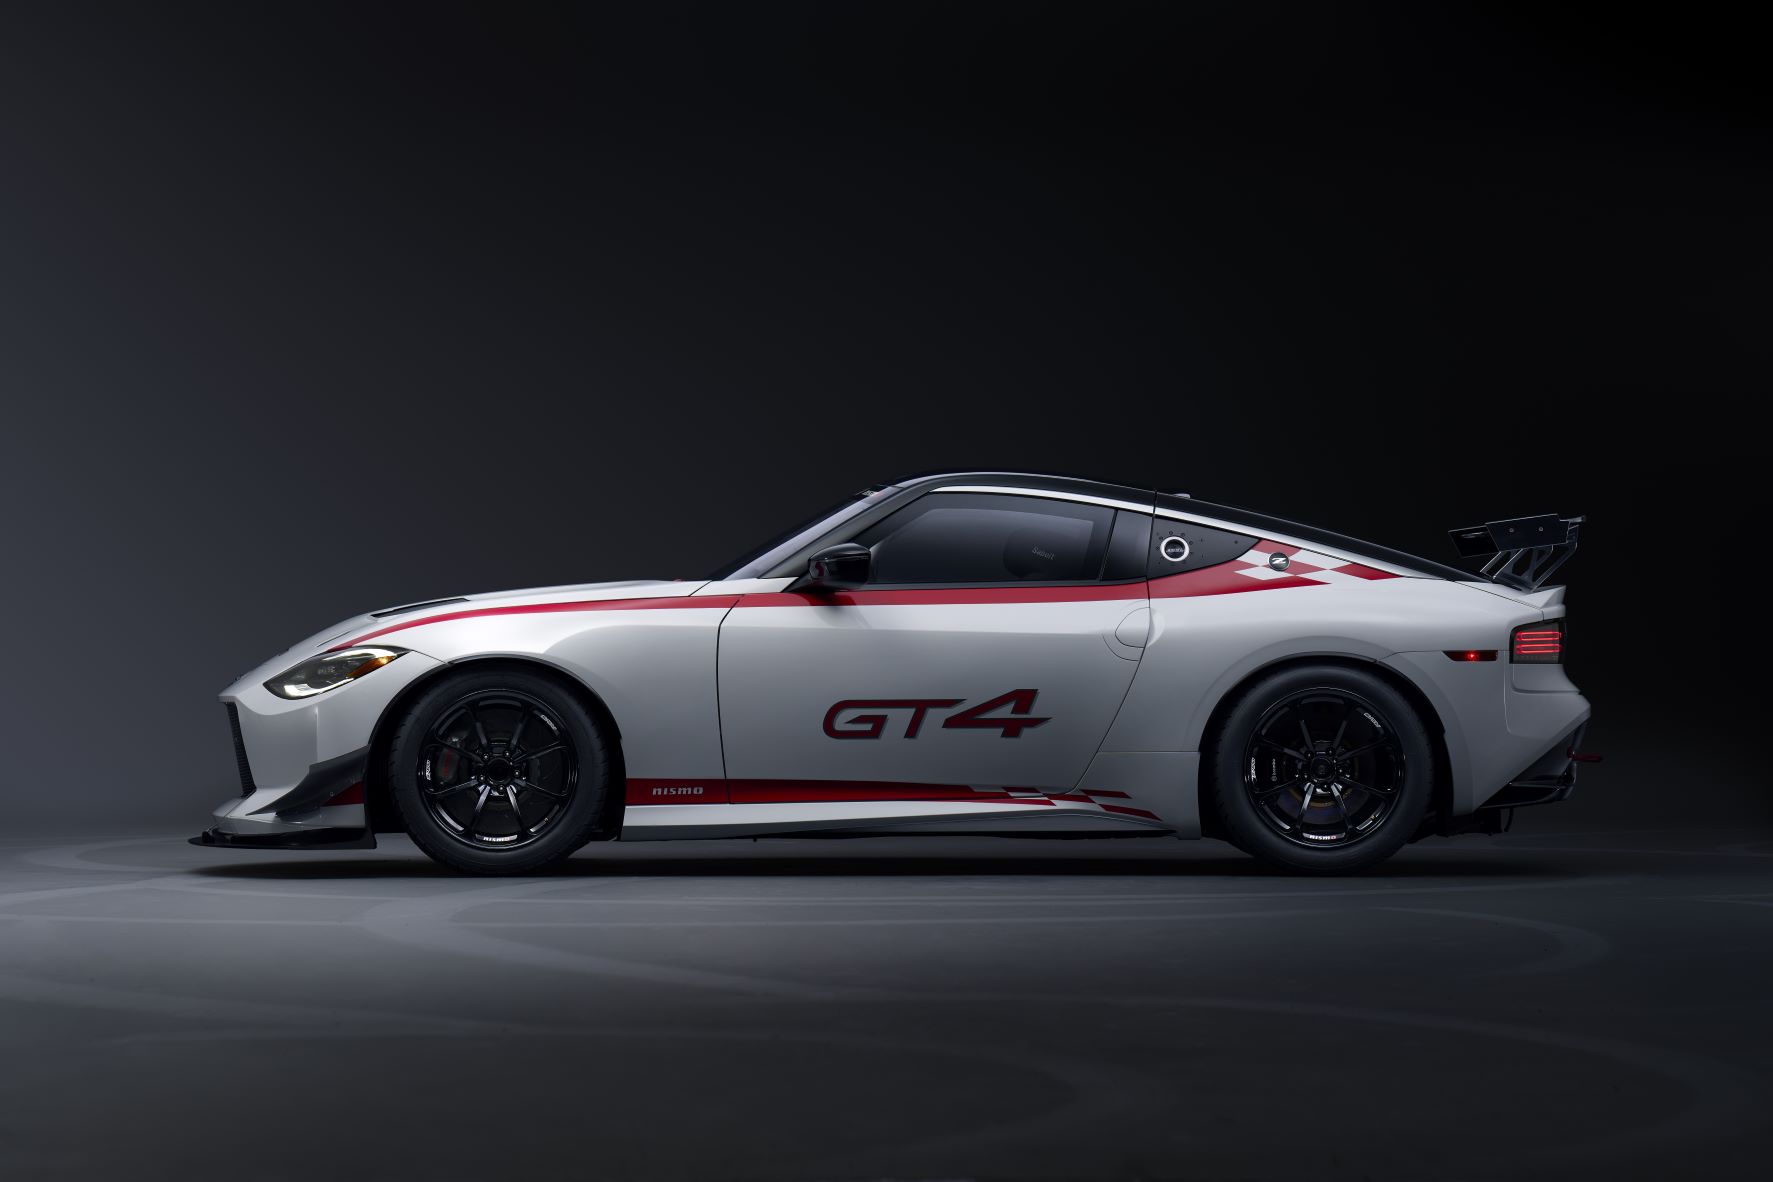 Side view of the Nissan Z GT4